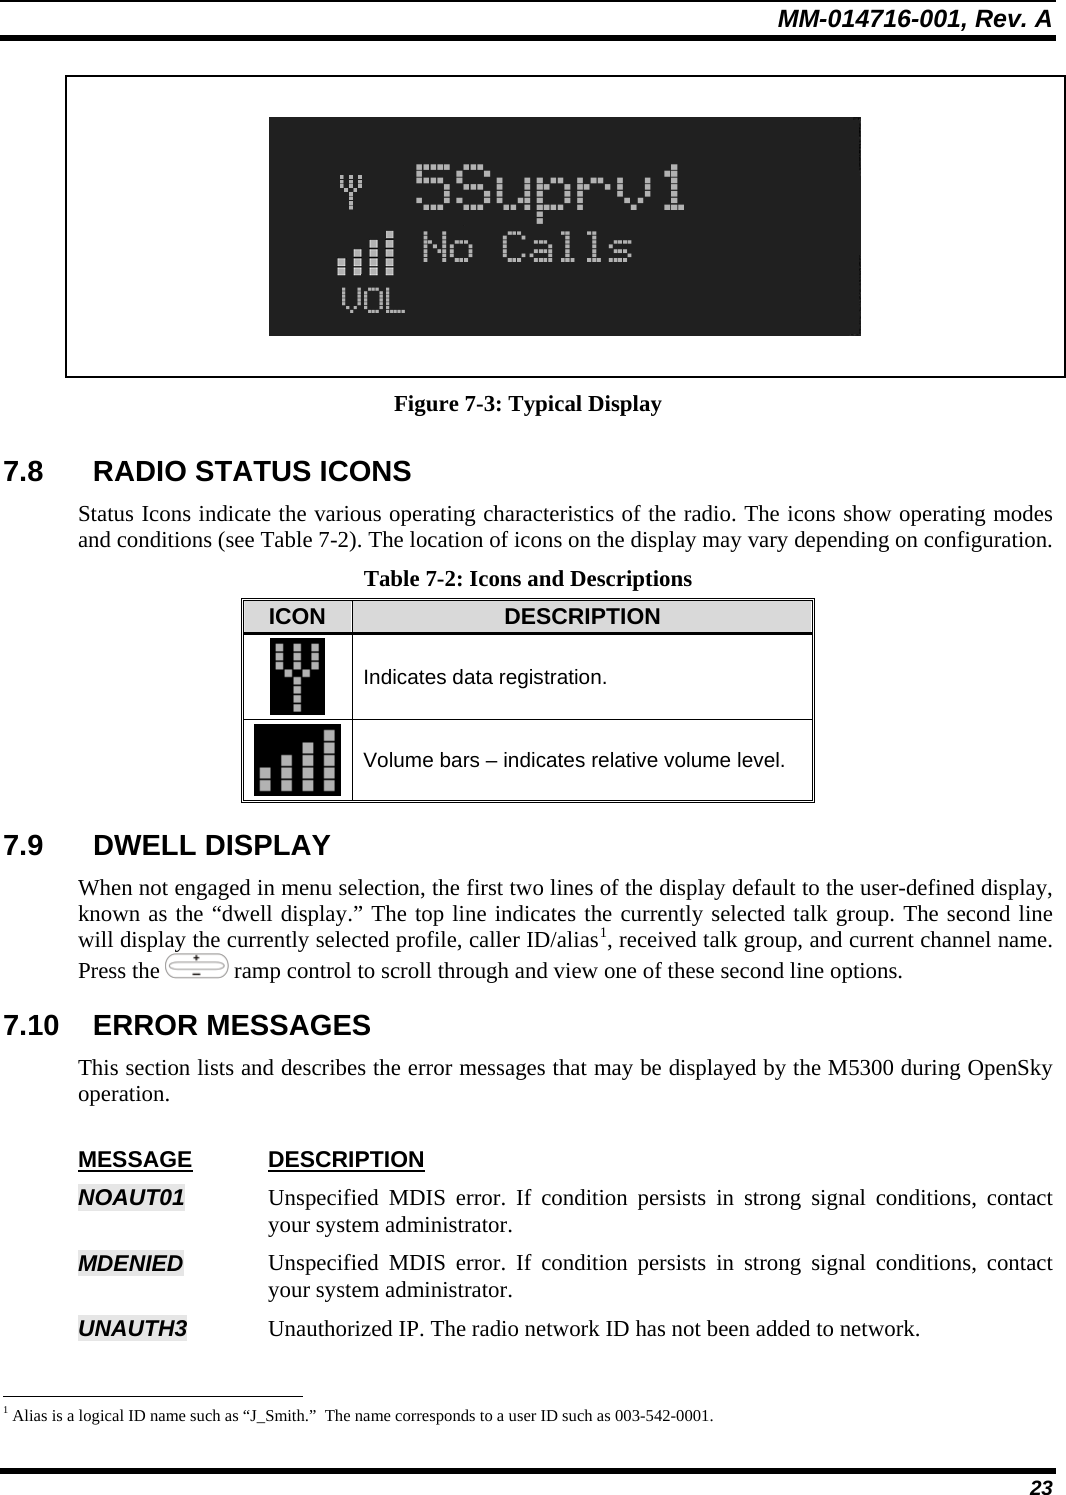 MM-014716-001, Rev. A 23    Figure 7-3: Typical Display 7.8  RADIO STATUS ICONS Status Icons indicate the various operating characteristics of the radio. The icons show operating modes and conditions (see Table 7-2). The location of icons on the display may vary depending on configuration. Table 7-2: Icons and Descriptions ICON  DESCRIPTION  Indicates data registration.  Volume bars – indicates relative volume level. 7.9 DWELL DISPLAY When not engaged in menu selection, the first two lines of the display default to the user-defined display, known as the “dwell display.” The top line indicates the currently selected talk group. The second line will display the currently selected profile, caller ID/alias1, received talk group, and current channel name. Press the   ramp control to scroll through and view one of these second line options.  7.10 ERROR MESSAGES This section lists and describes the error messages that may be displayed by the M5300 during OpenSky operation.  MESSAGE DESCRIPTION NOAUT01  Unspecified MDIS error. If condition persists in strong signal conditions, contact your system administrator. MDENIED   Unspecified MDIS error. If condition persists in strong signal conditions, contact your system administrator. UNAUTH3  Unauthorized IP. The radio network ID has not been added to network.                                                            1 Alias is a logical ID name such as “J_Smith.”  The name corresponds to a user ID such as 003-542-0001. 